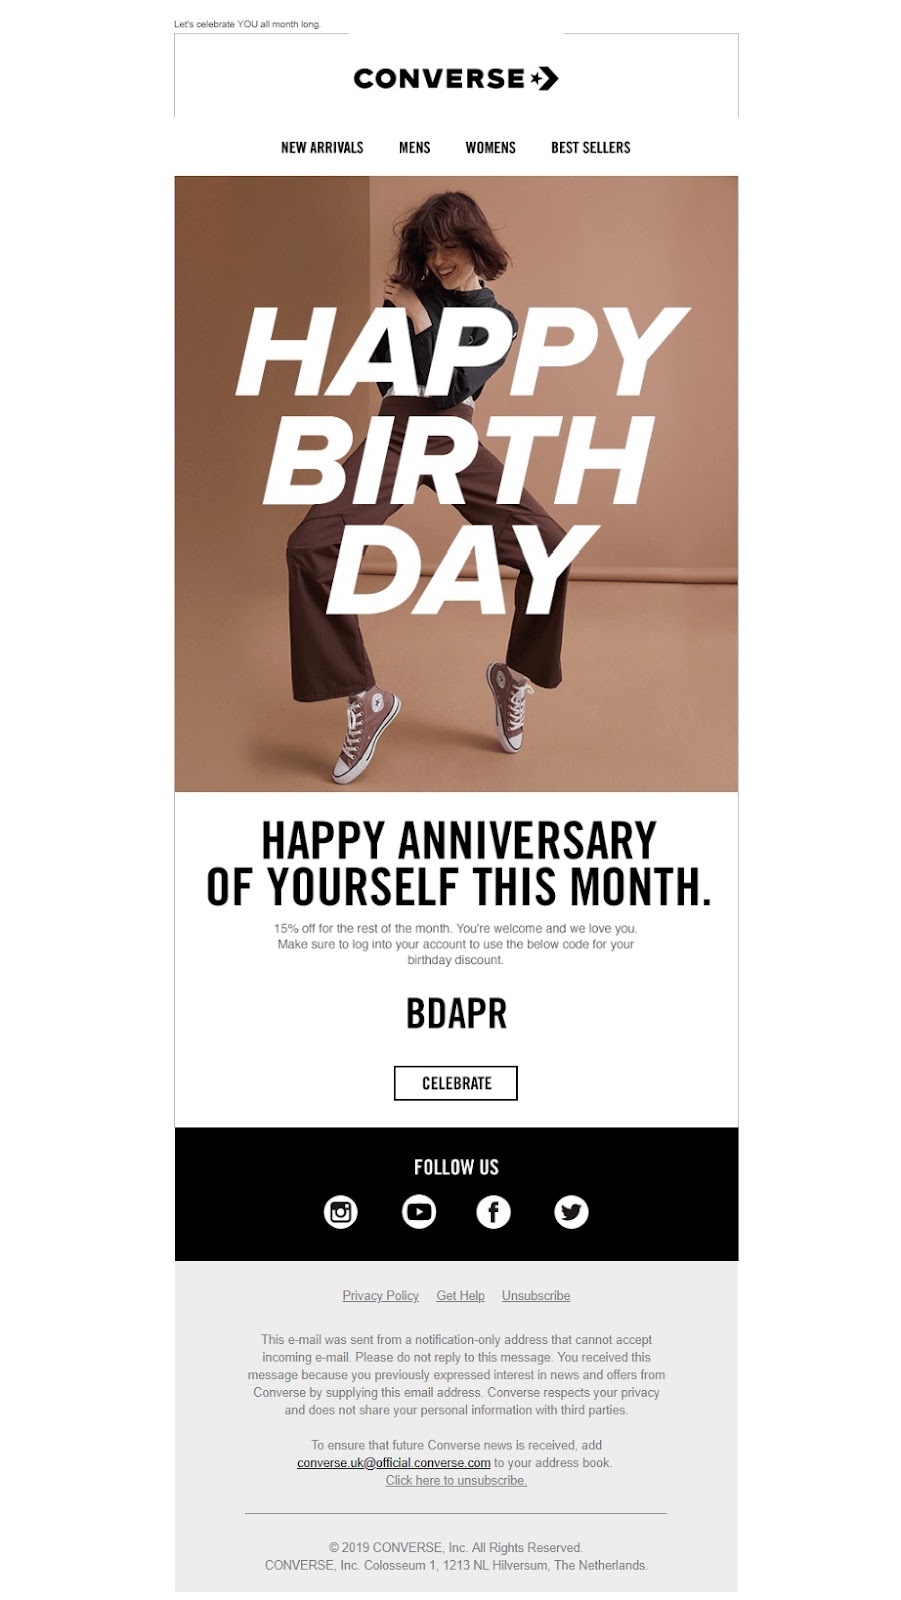 Converse birthday promotion email with a woman jumping in brown Converse sneakers